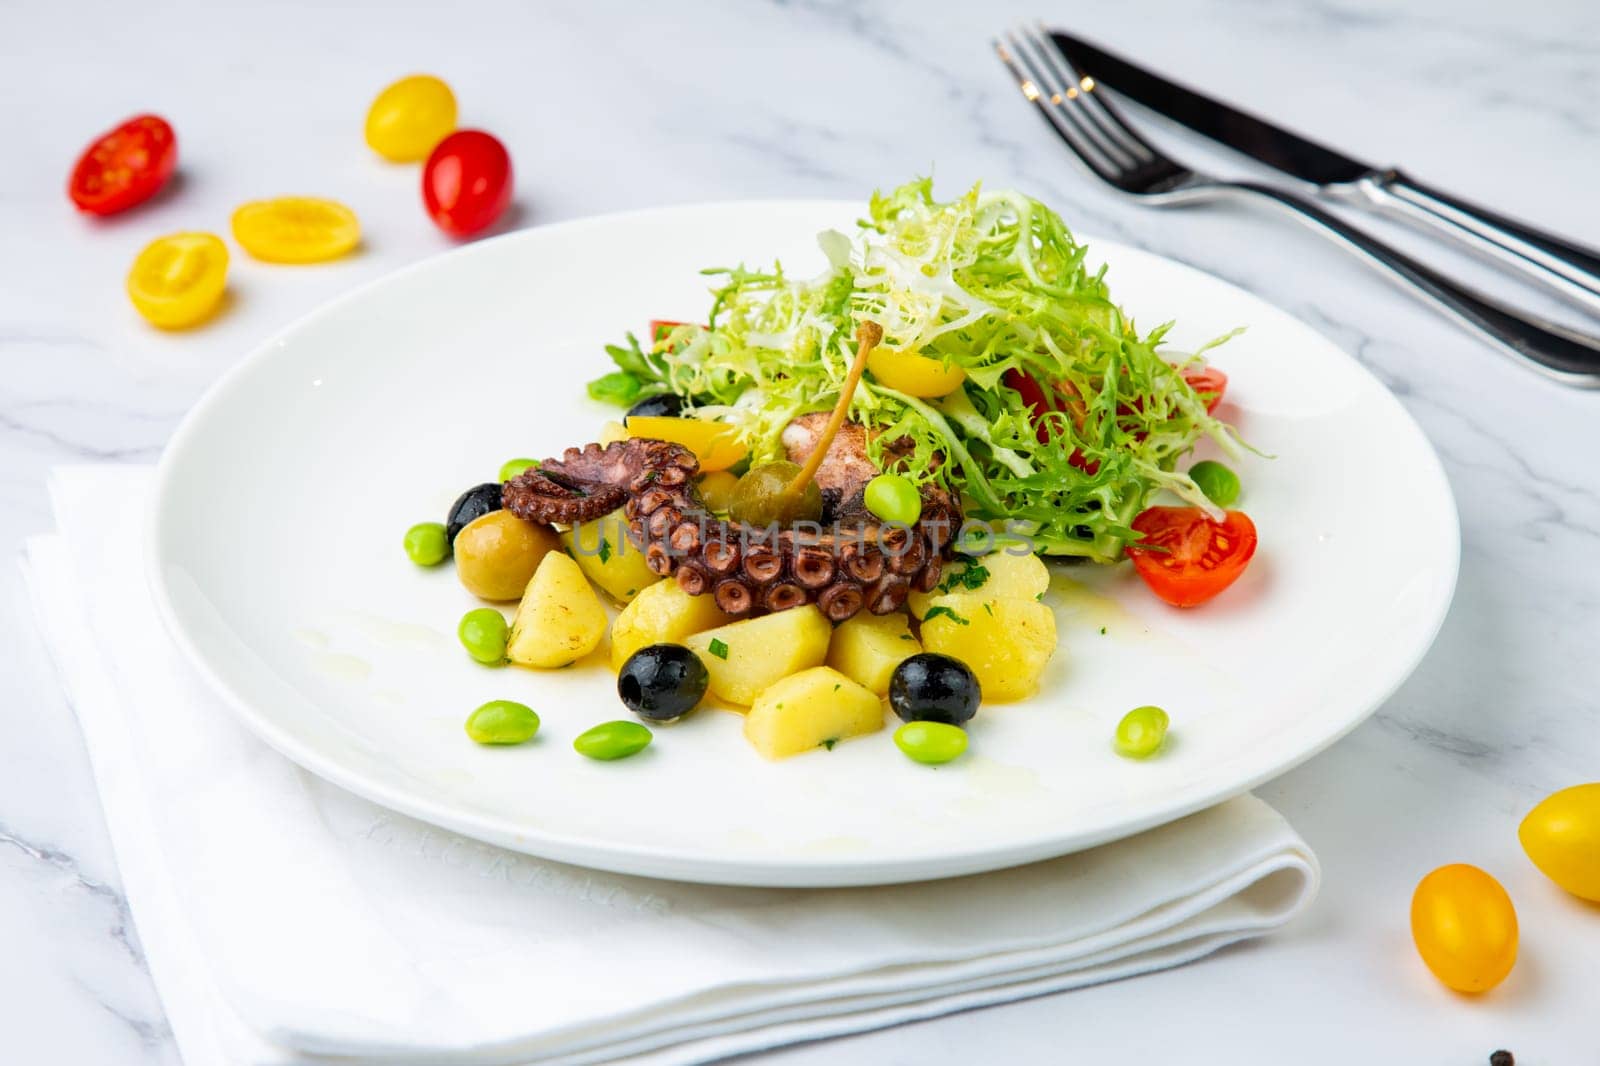 salad with olives, herbs, cherry tomatoes, potatoes and octopus tentacles side view by tewolf